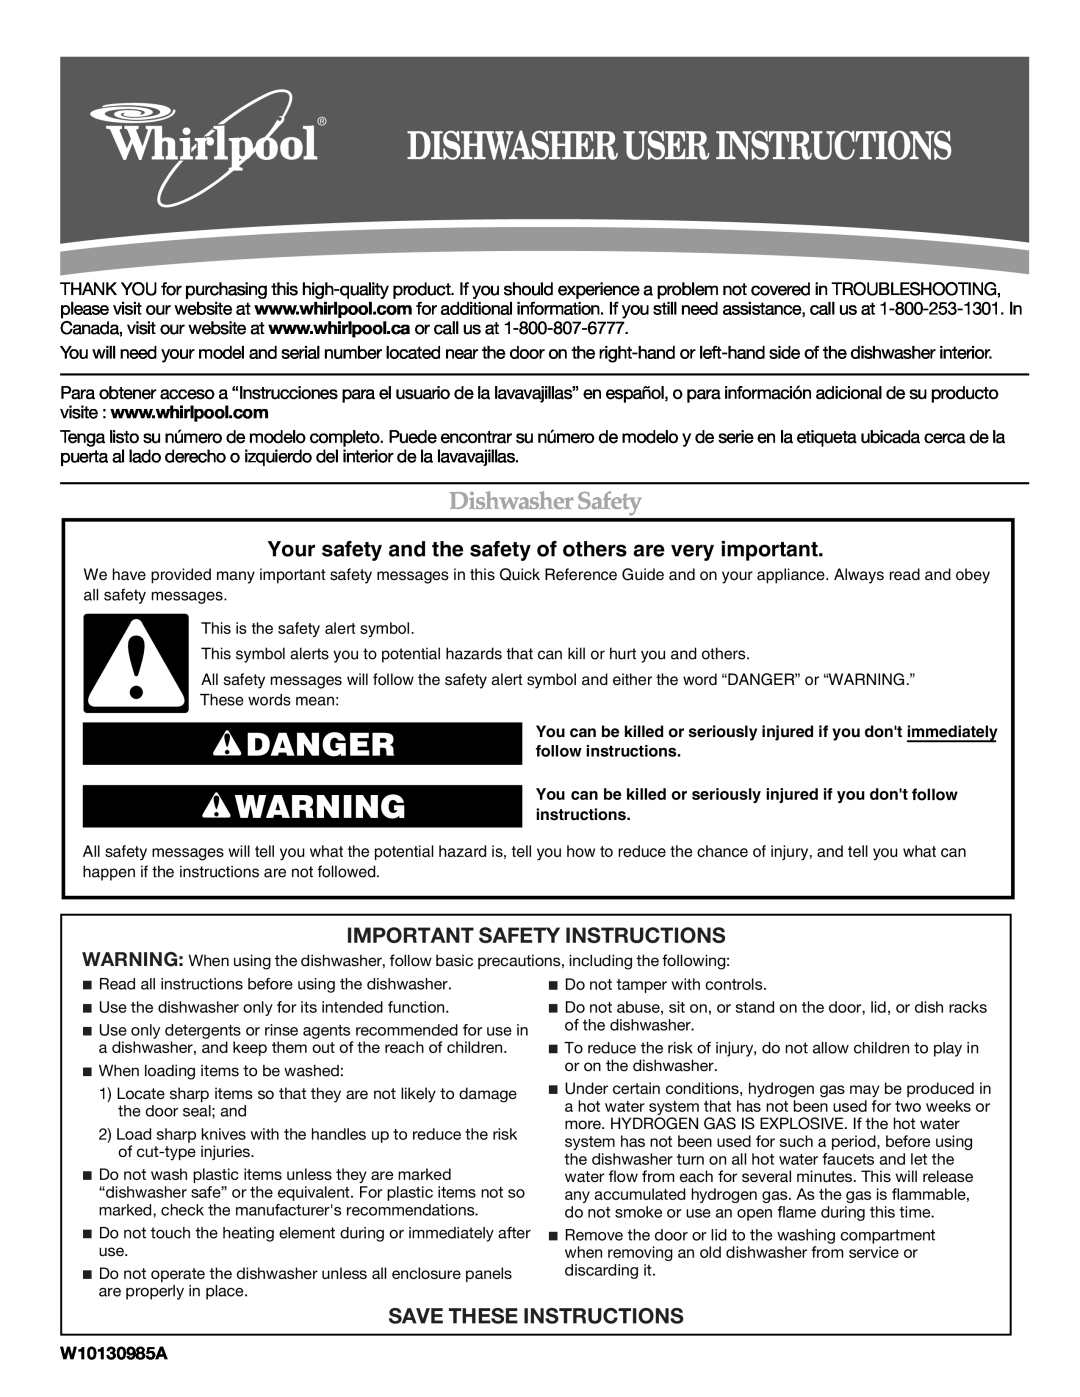 Whirlpool W10130985A important safety instructions Dishwasher User Instructions, Danger, Dishwasher Safety 